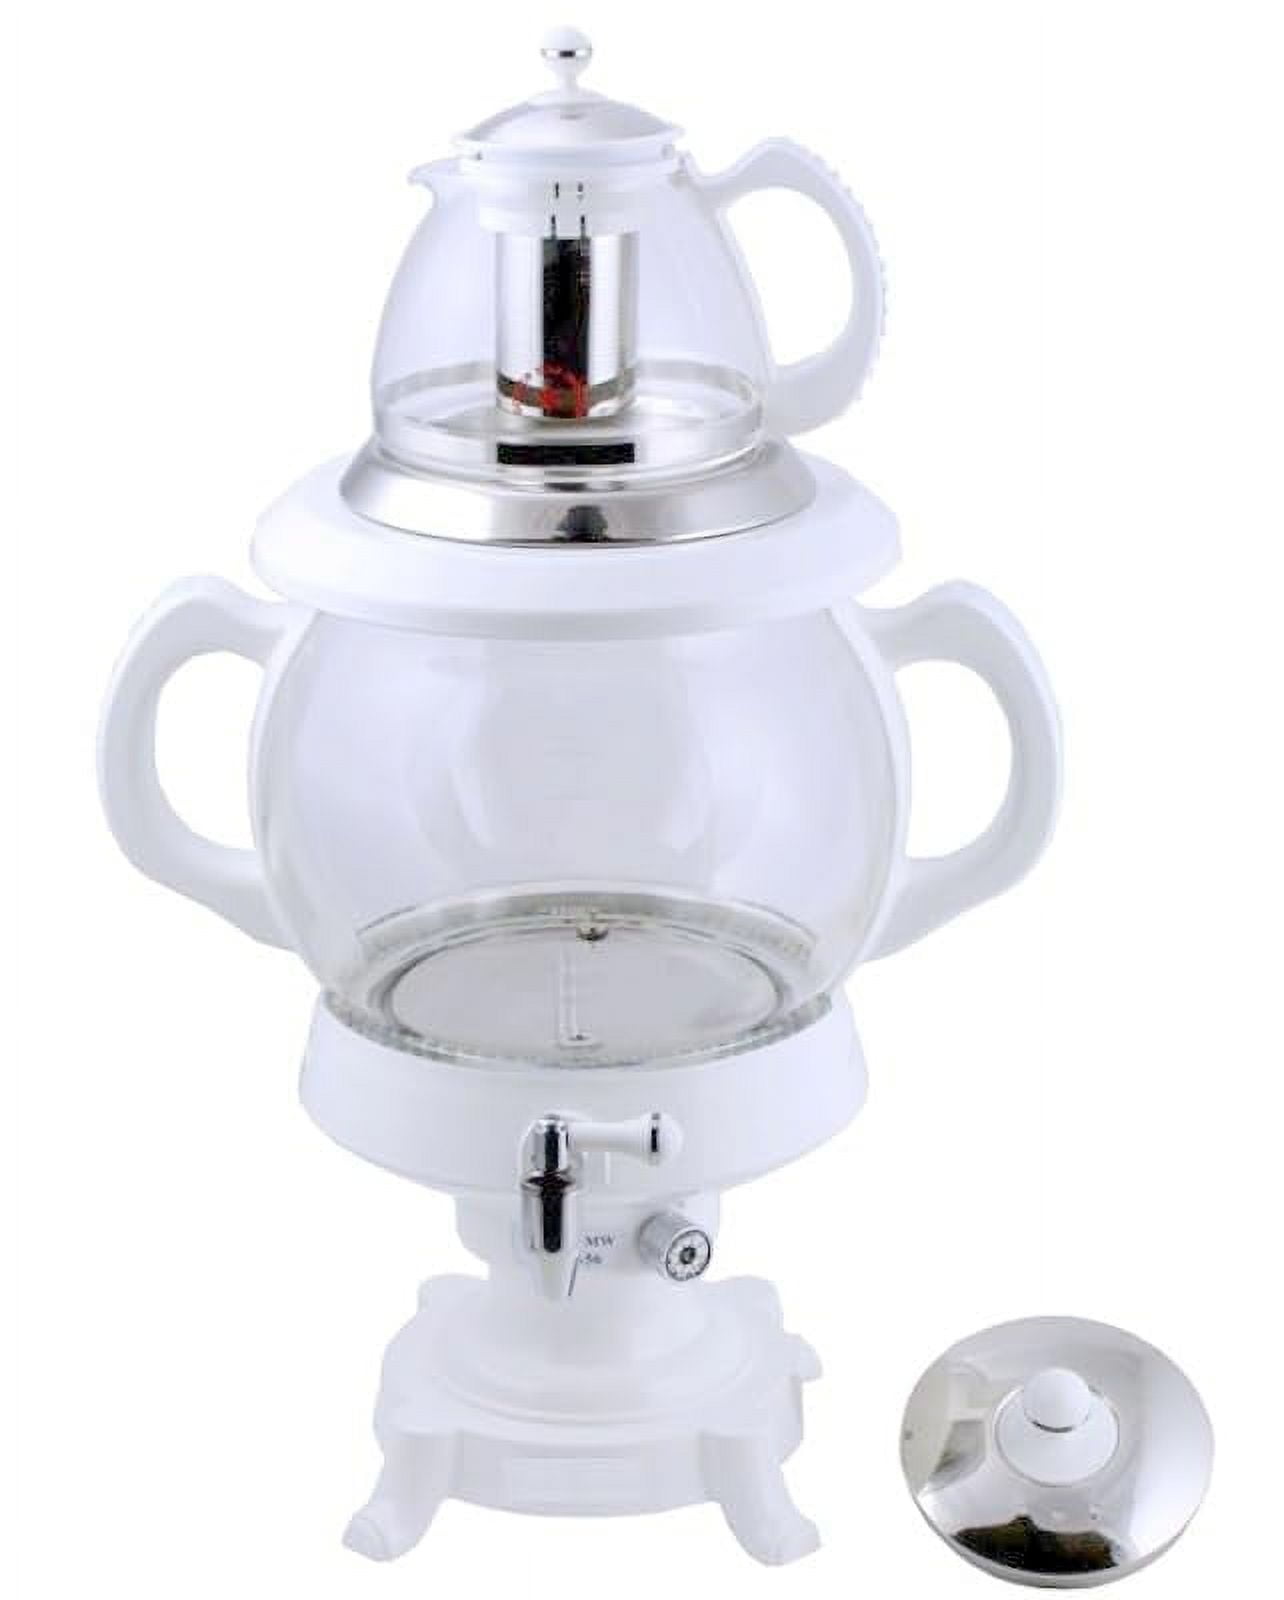 Golda Inc. Stainless Steel Turkish Tea Maker, Samovar, Electric Kettle, with Boil-Dry Protection